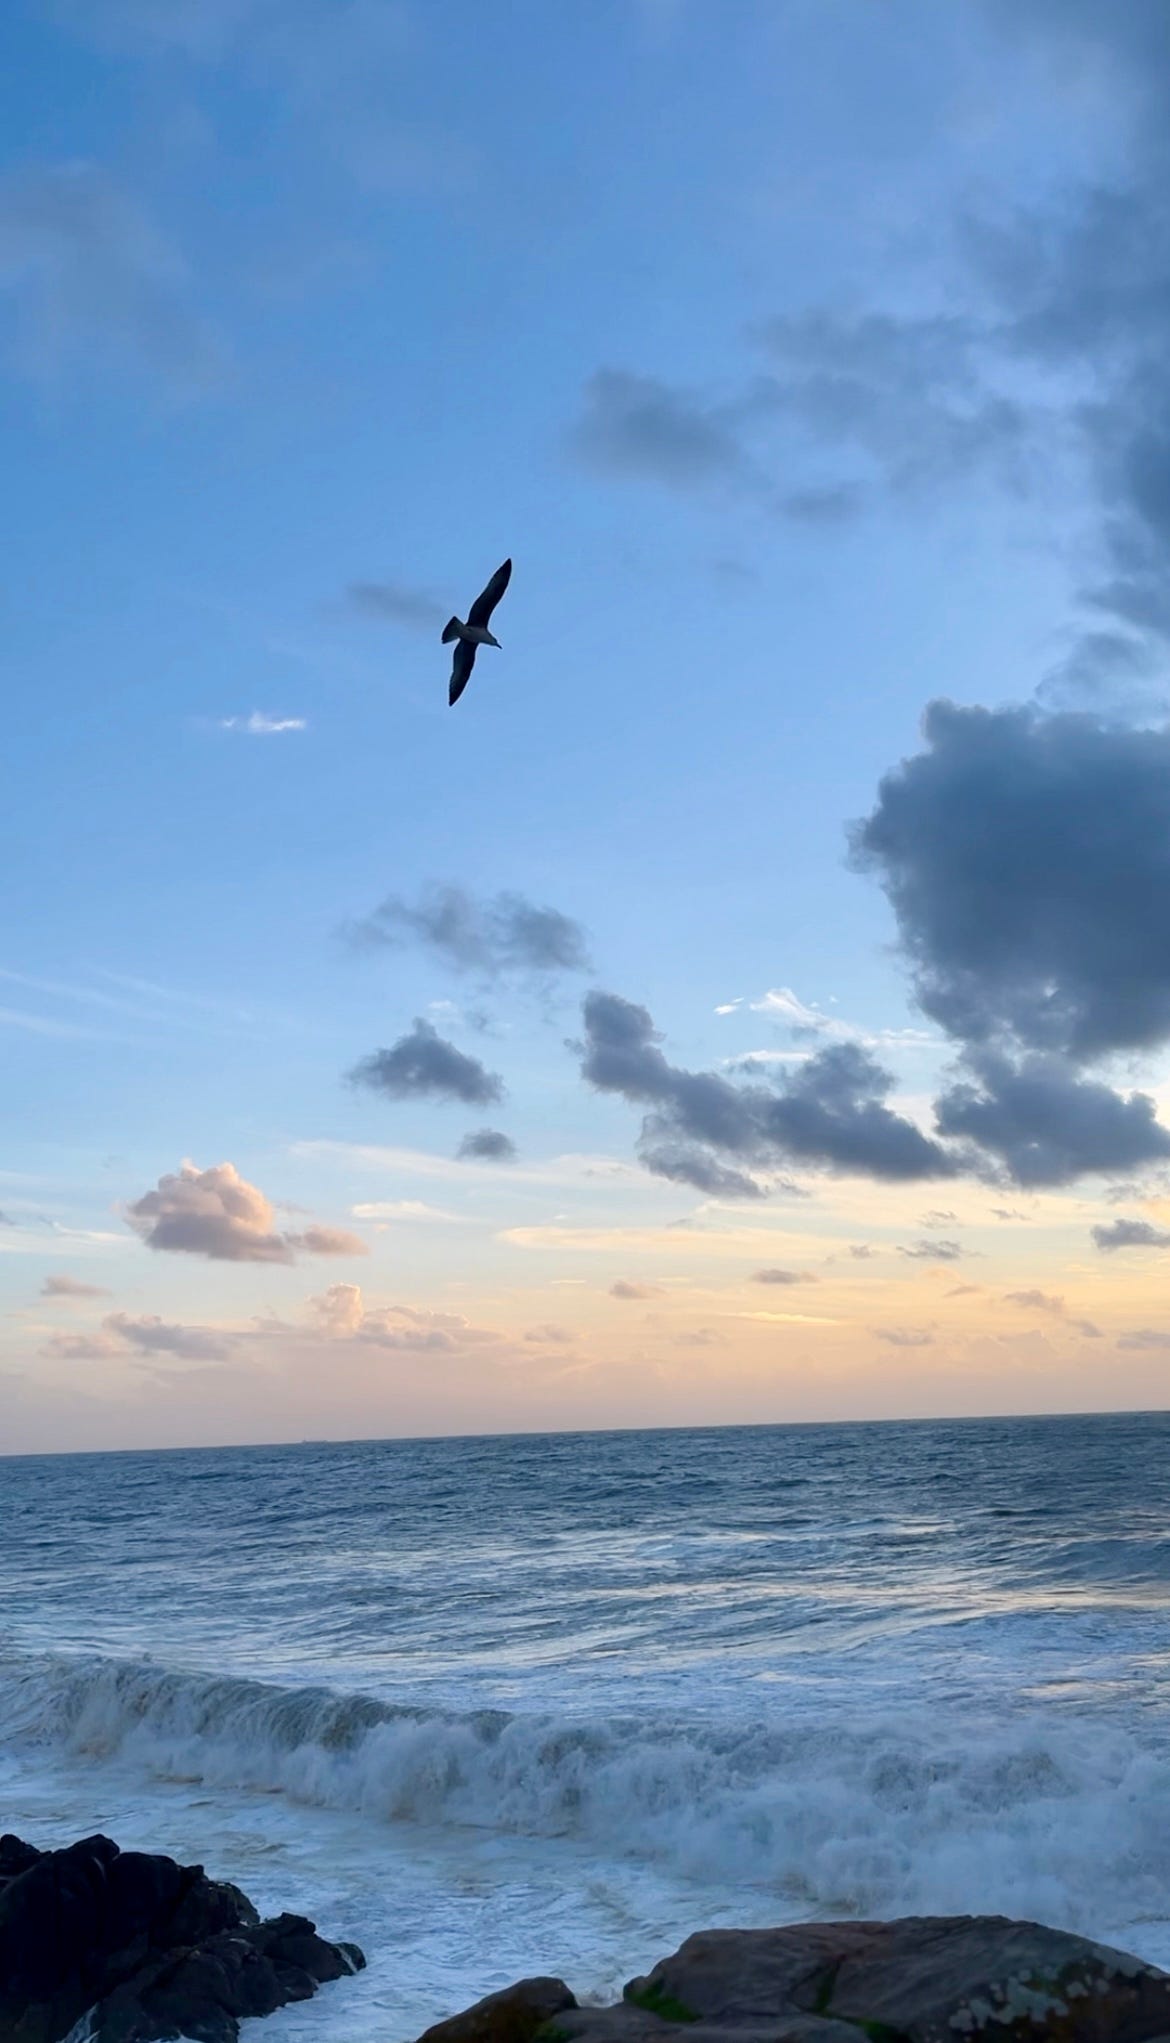 image: landscape majestic shot of a seagull soaring high up in the sky, below, the roaring waves